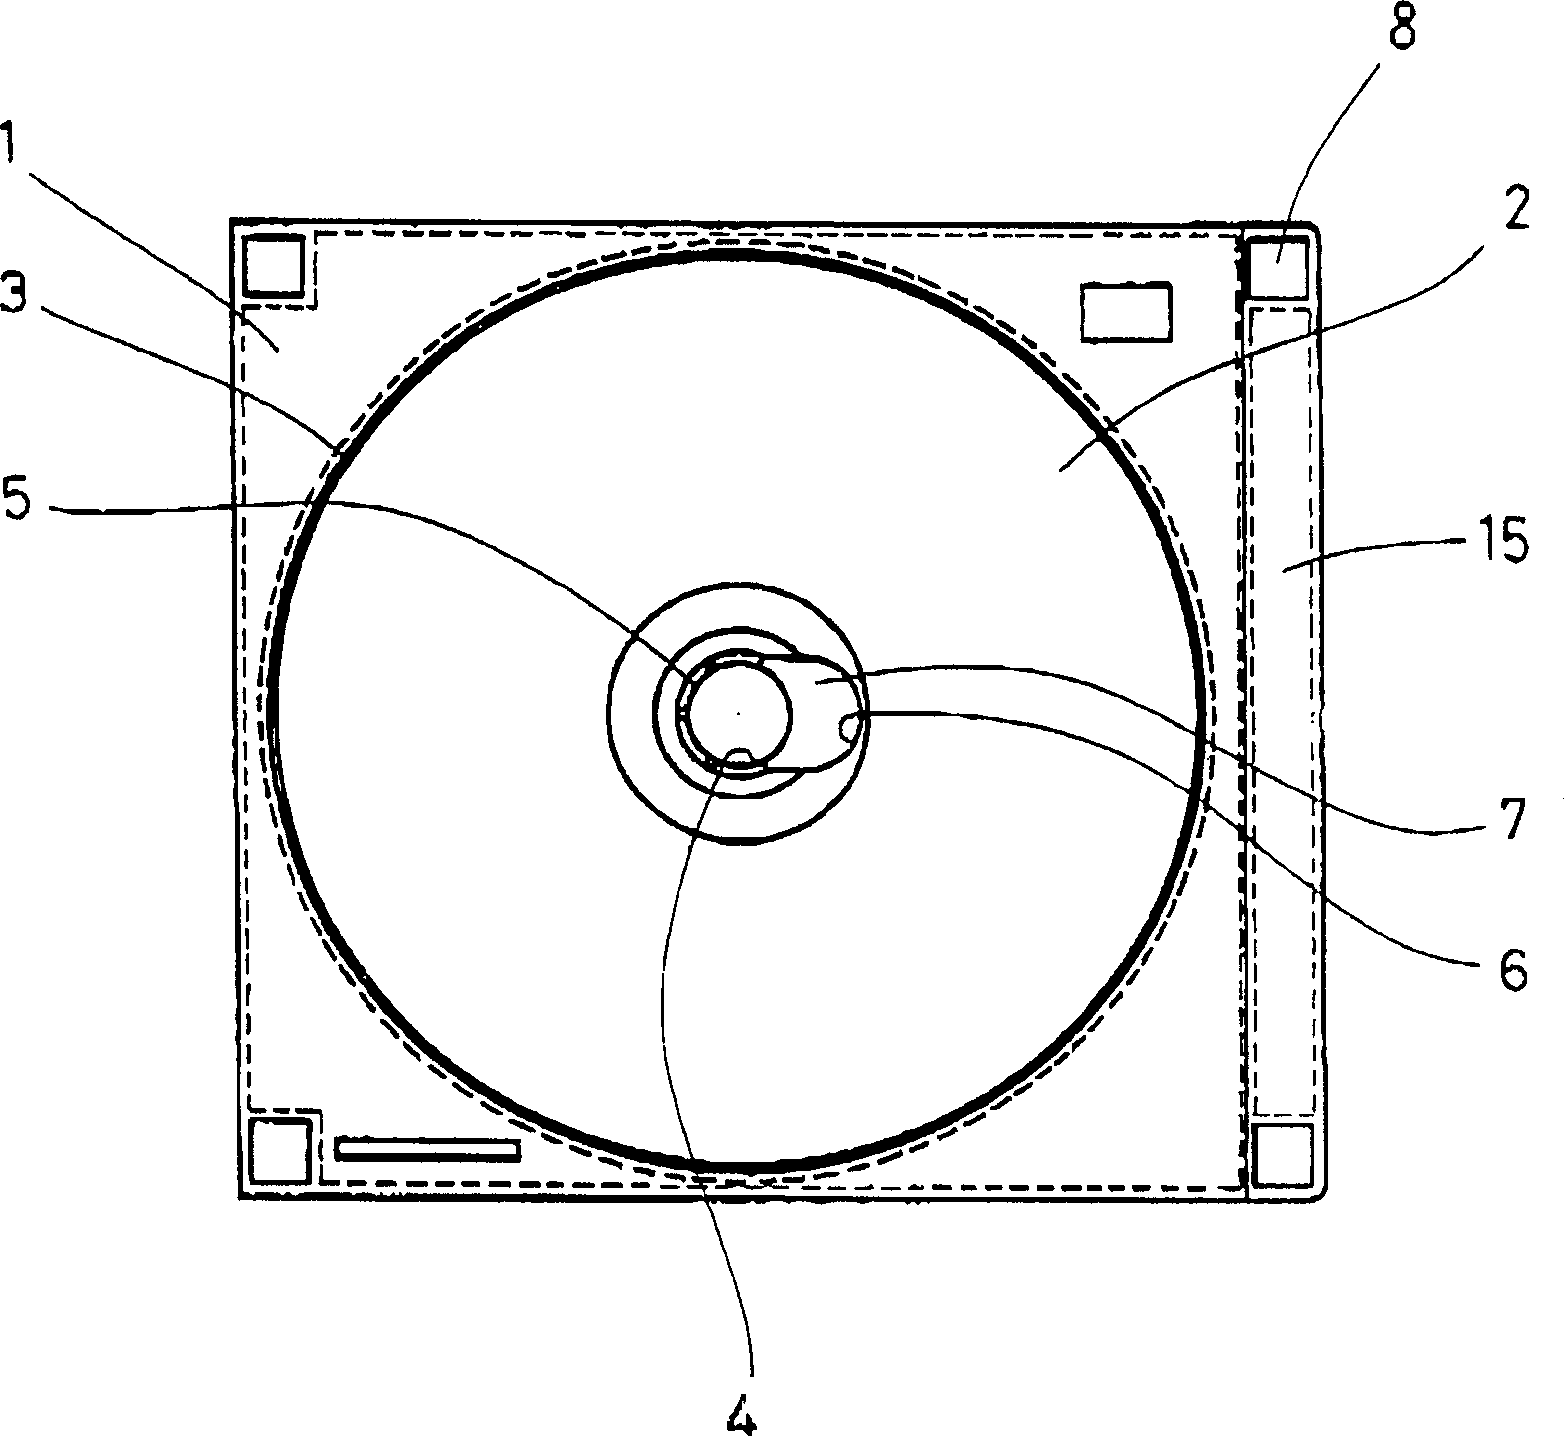 Optical disk rallet